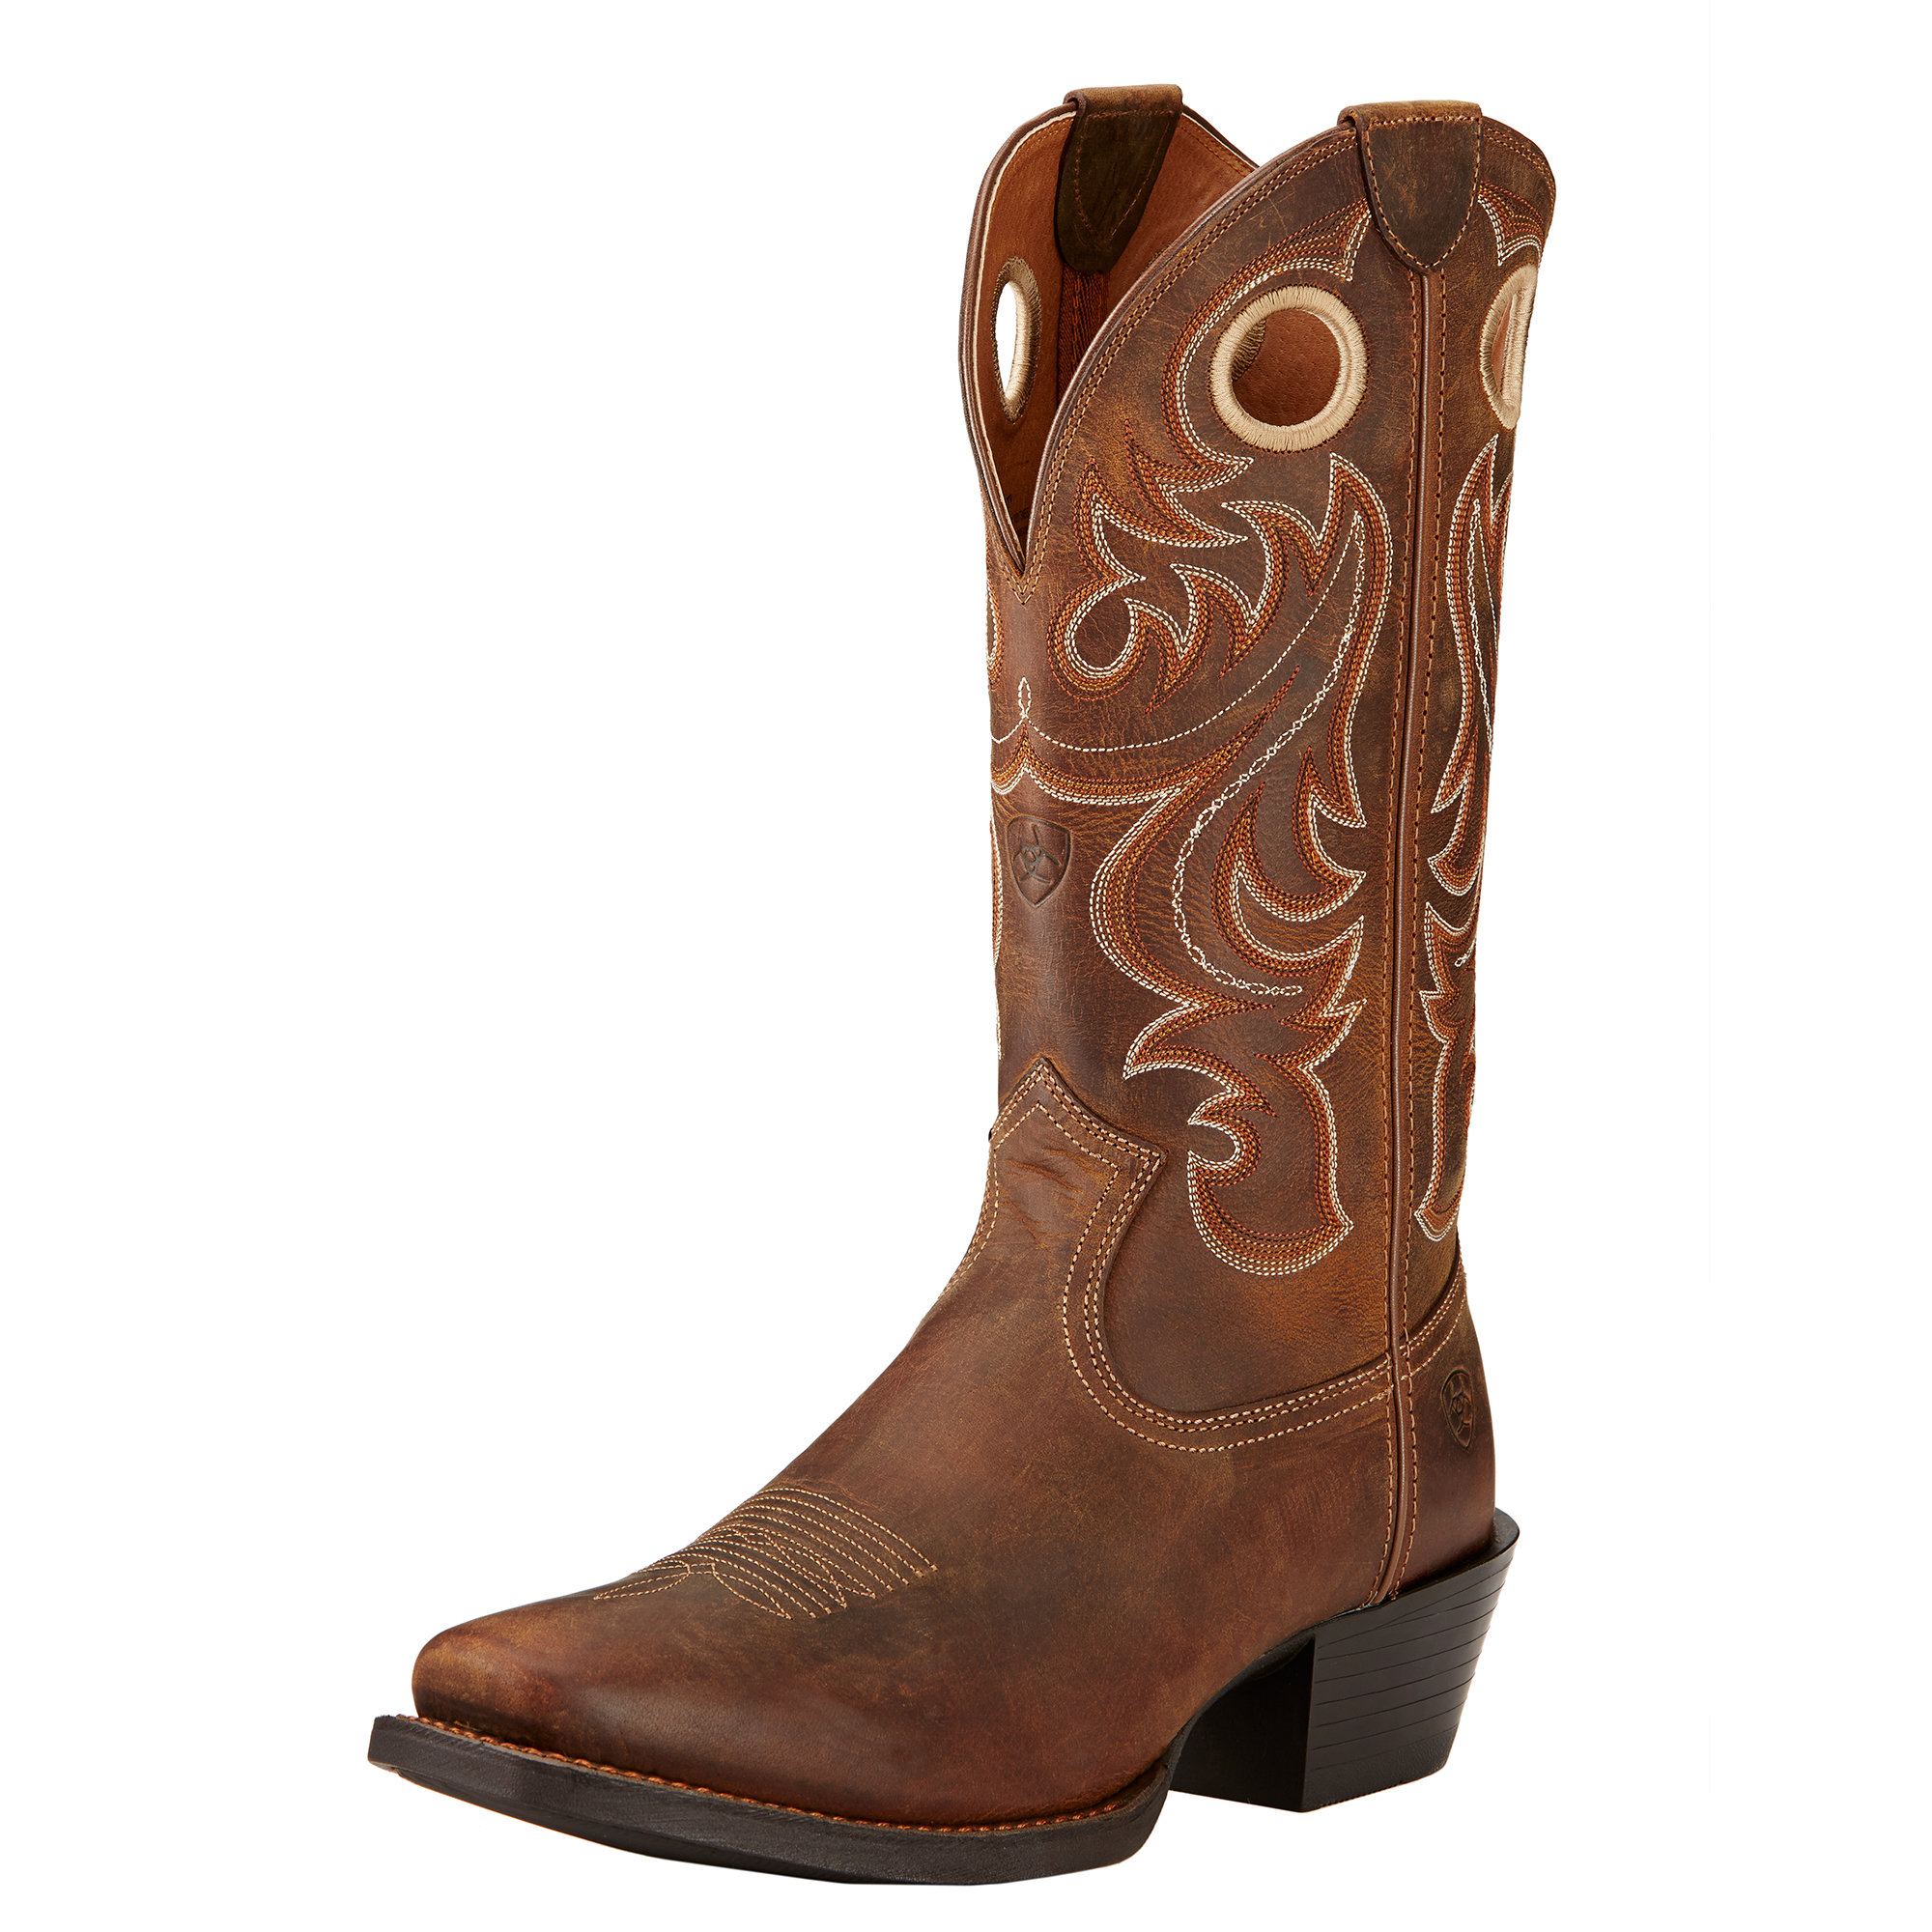 Ariat_Sport_Square_Toe_Western_Boot_10017365_3-4_front